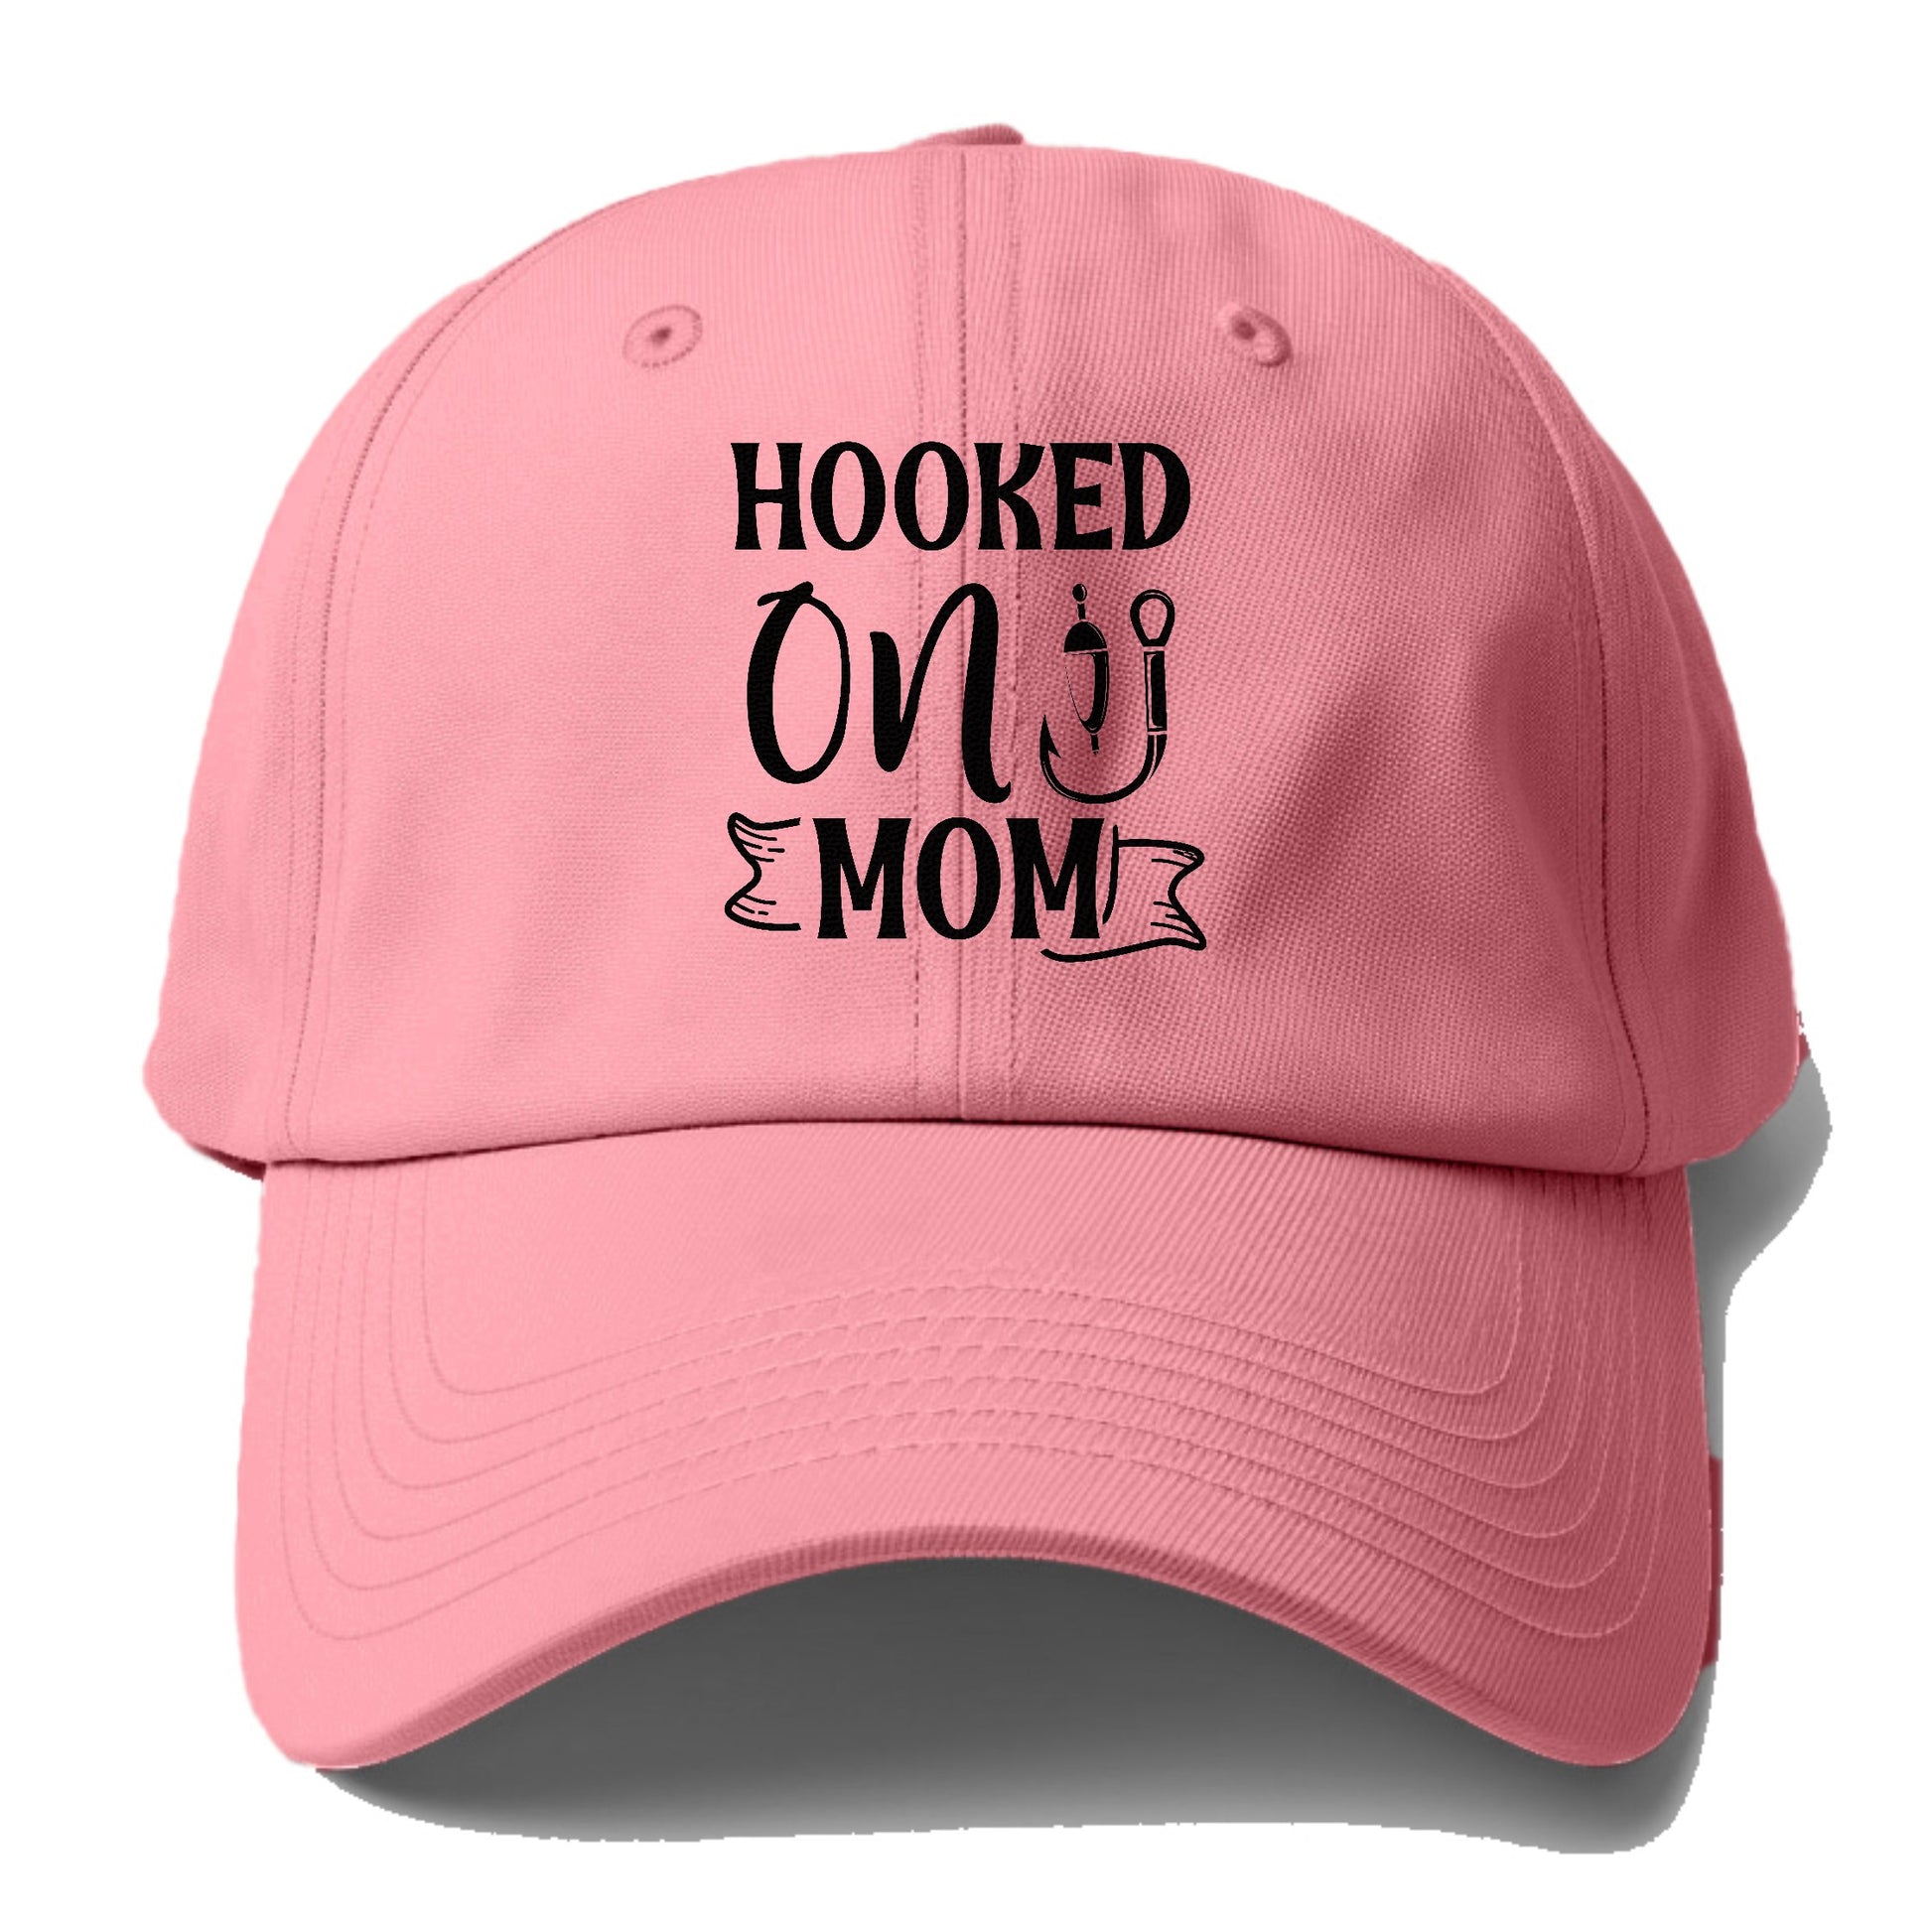 hooked on mom Hat